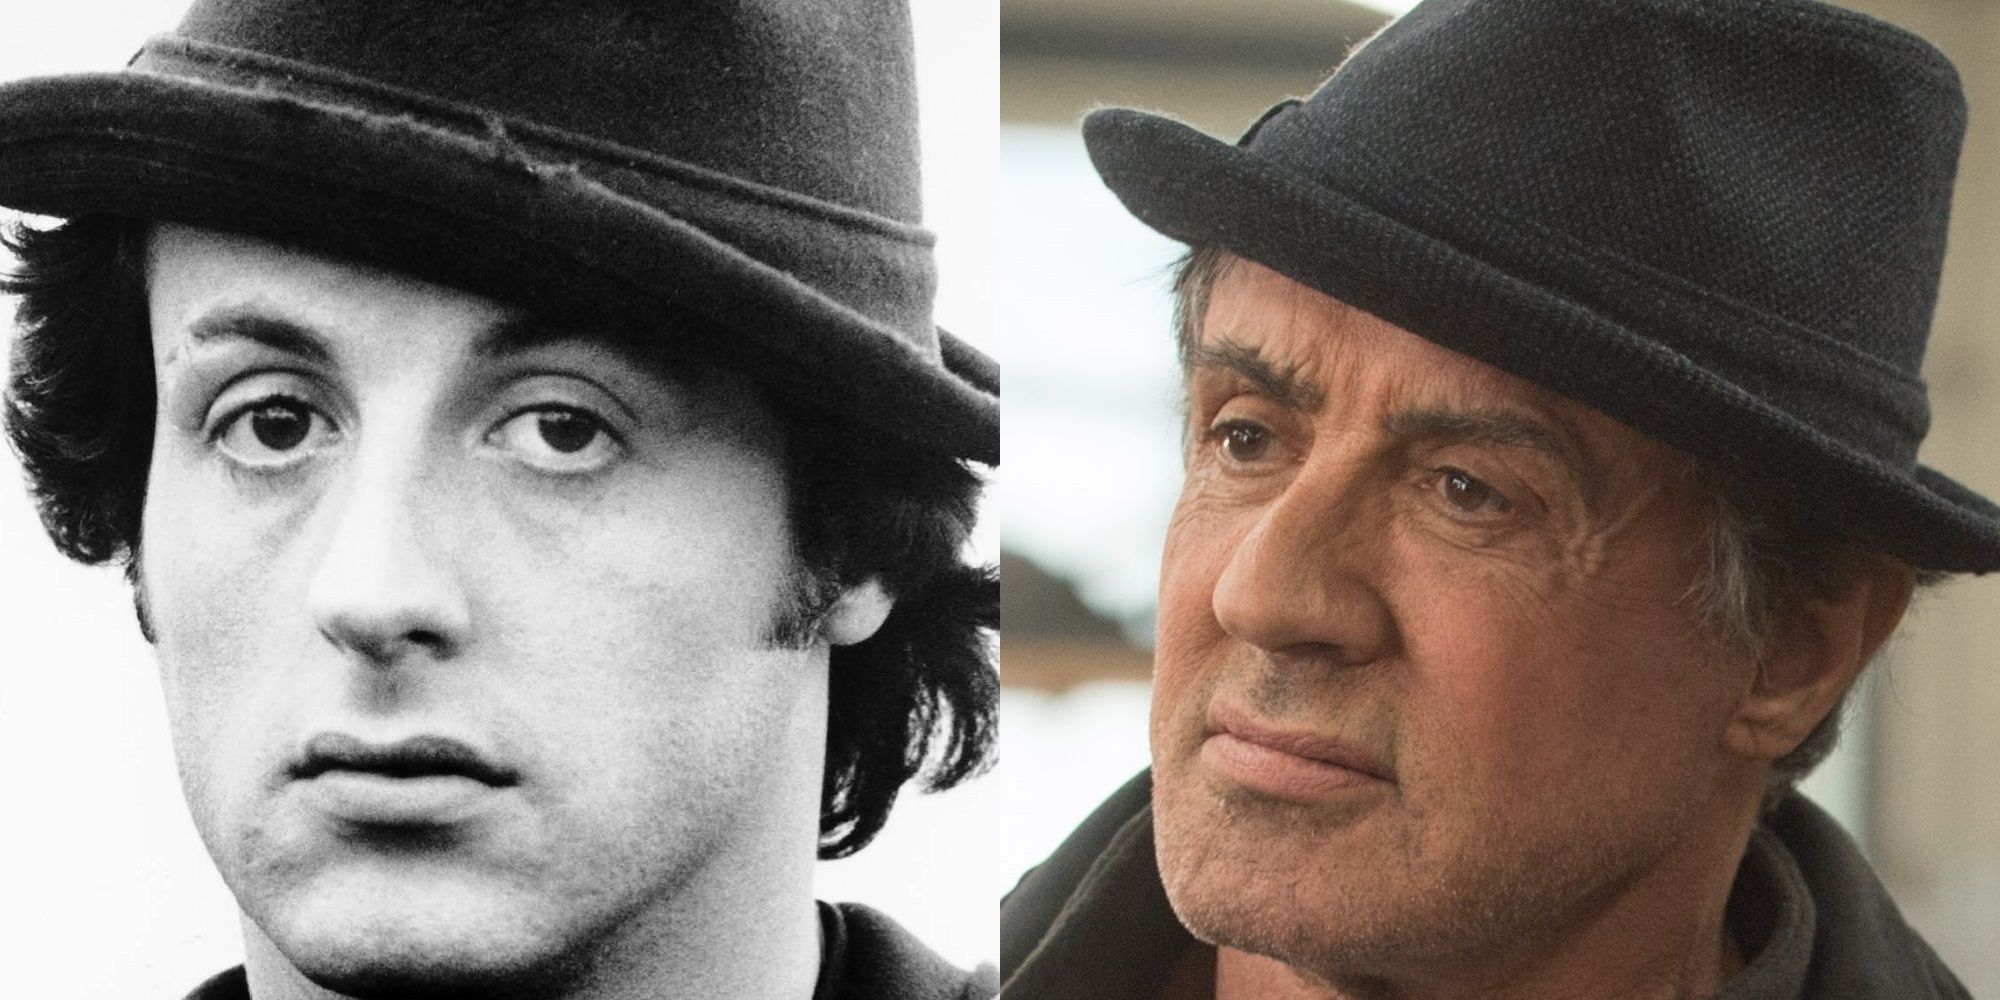 Sylvester Stallone In Rocky II and Creed